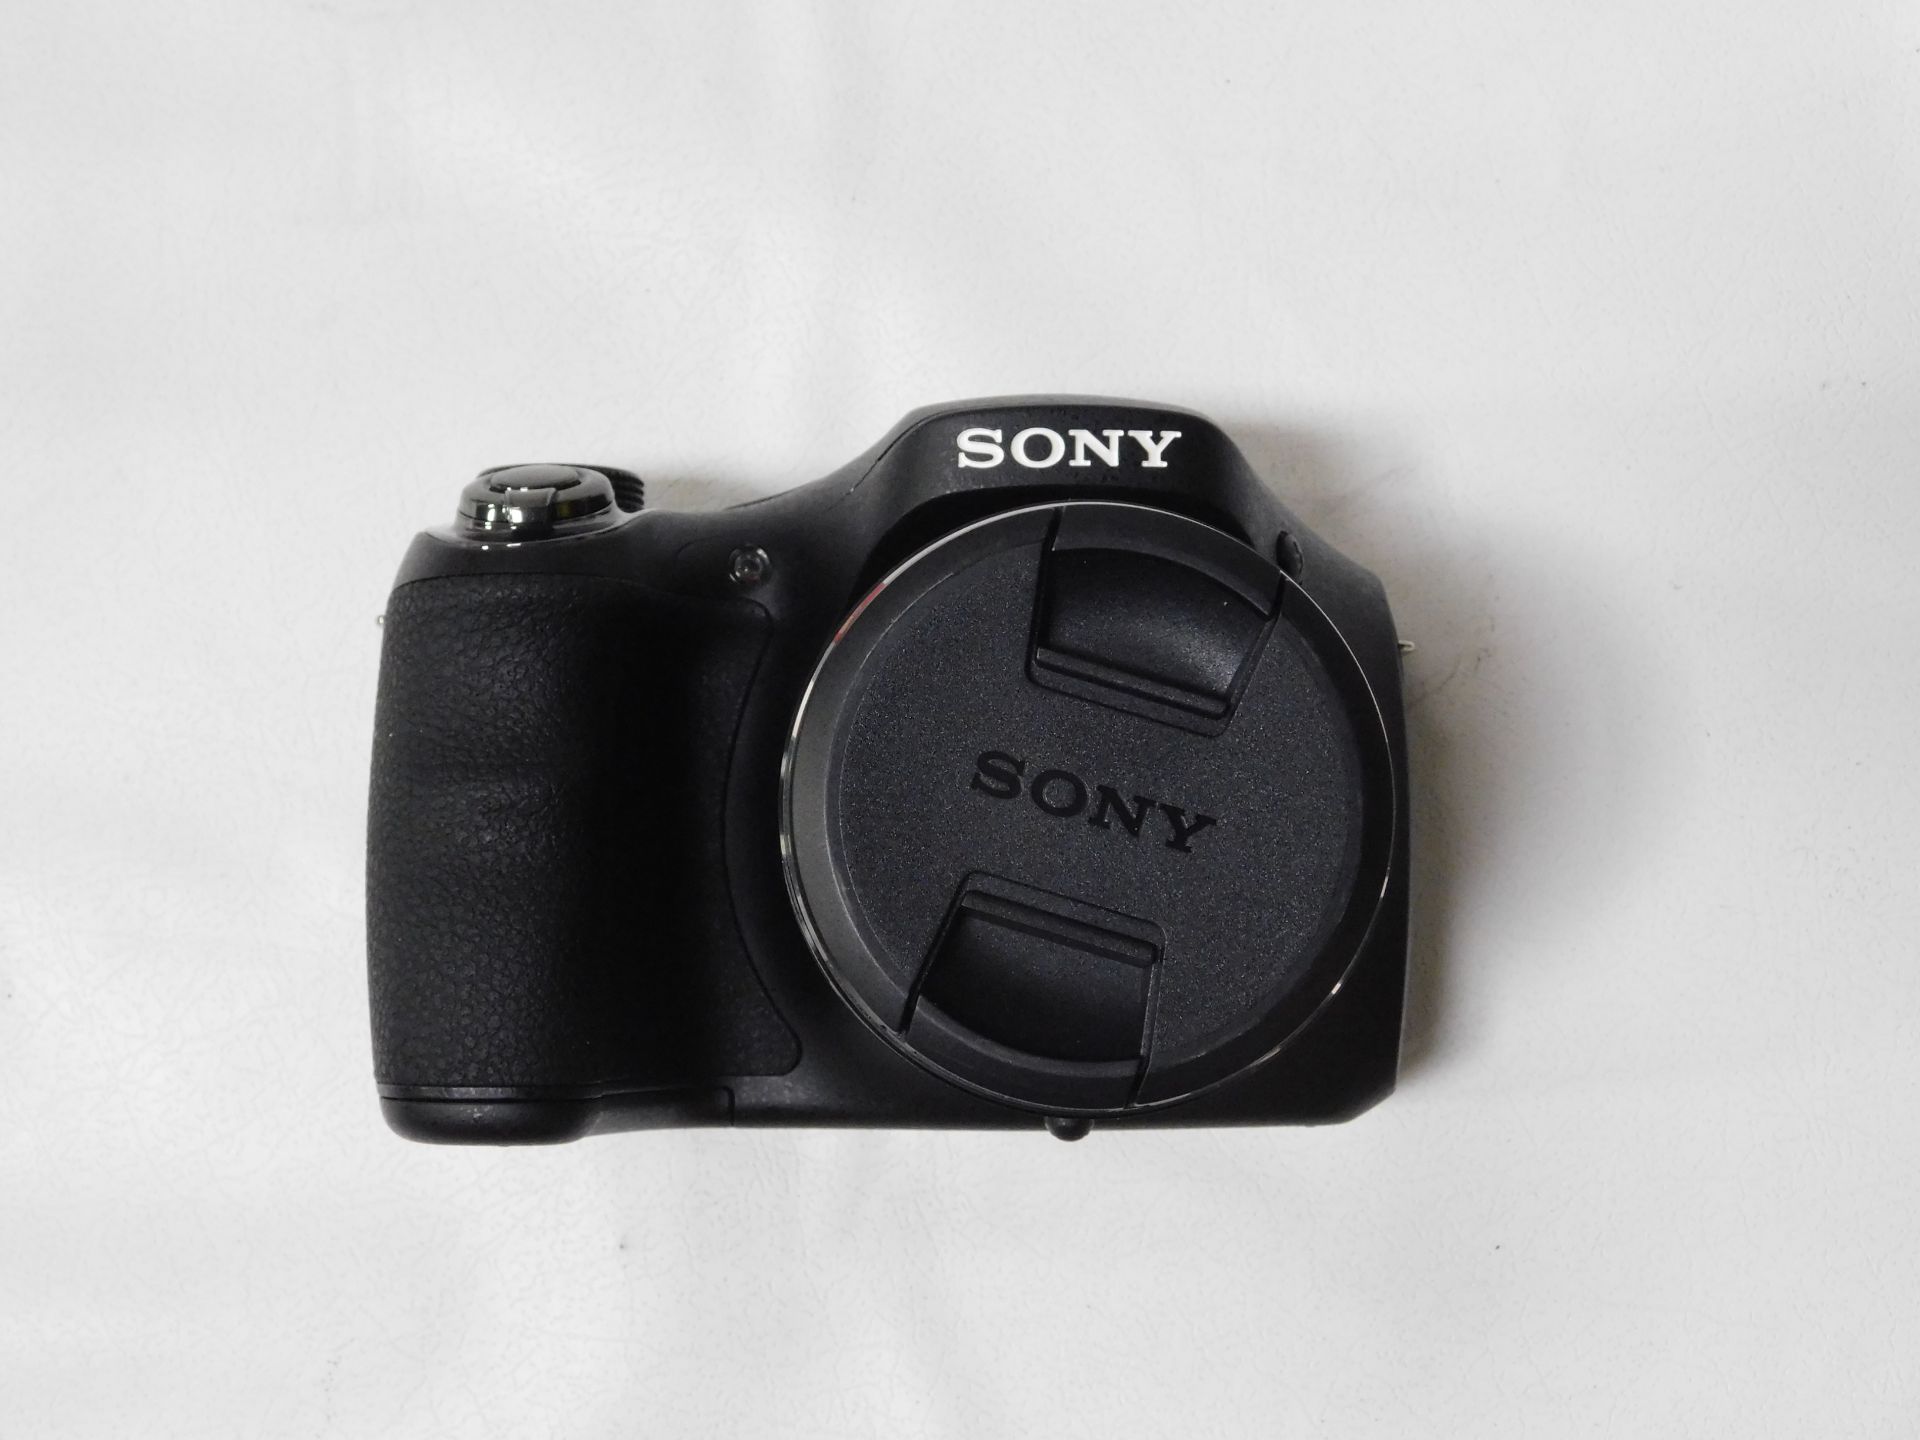 Sony DSC-H300 Cyber-Shot Digital Camera, Serial Number 0711425 with 35x Optical Zoom Lens (Location: - Bild 2 aus 5